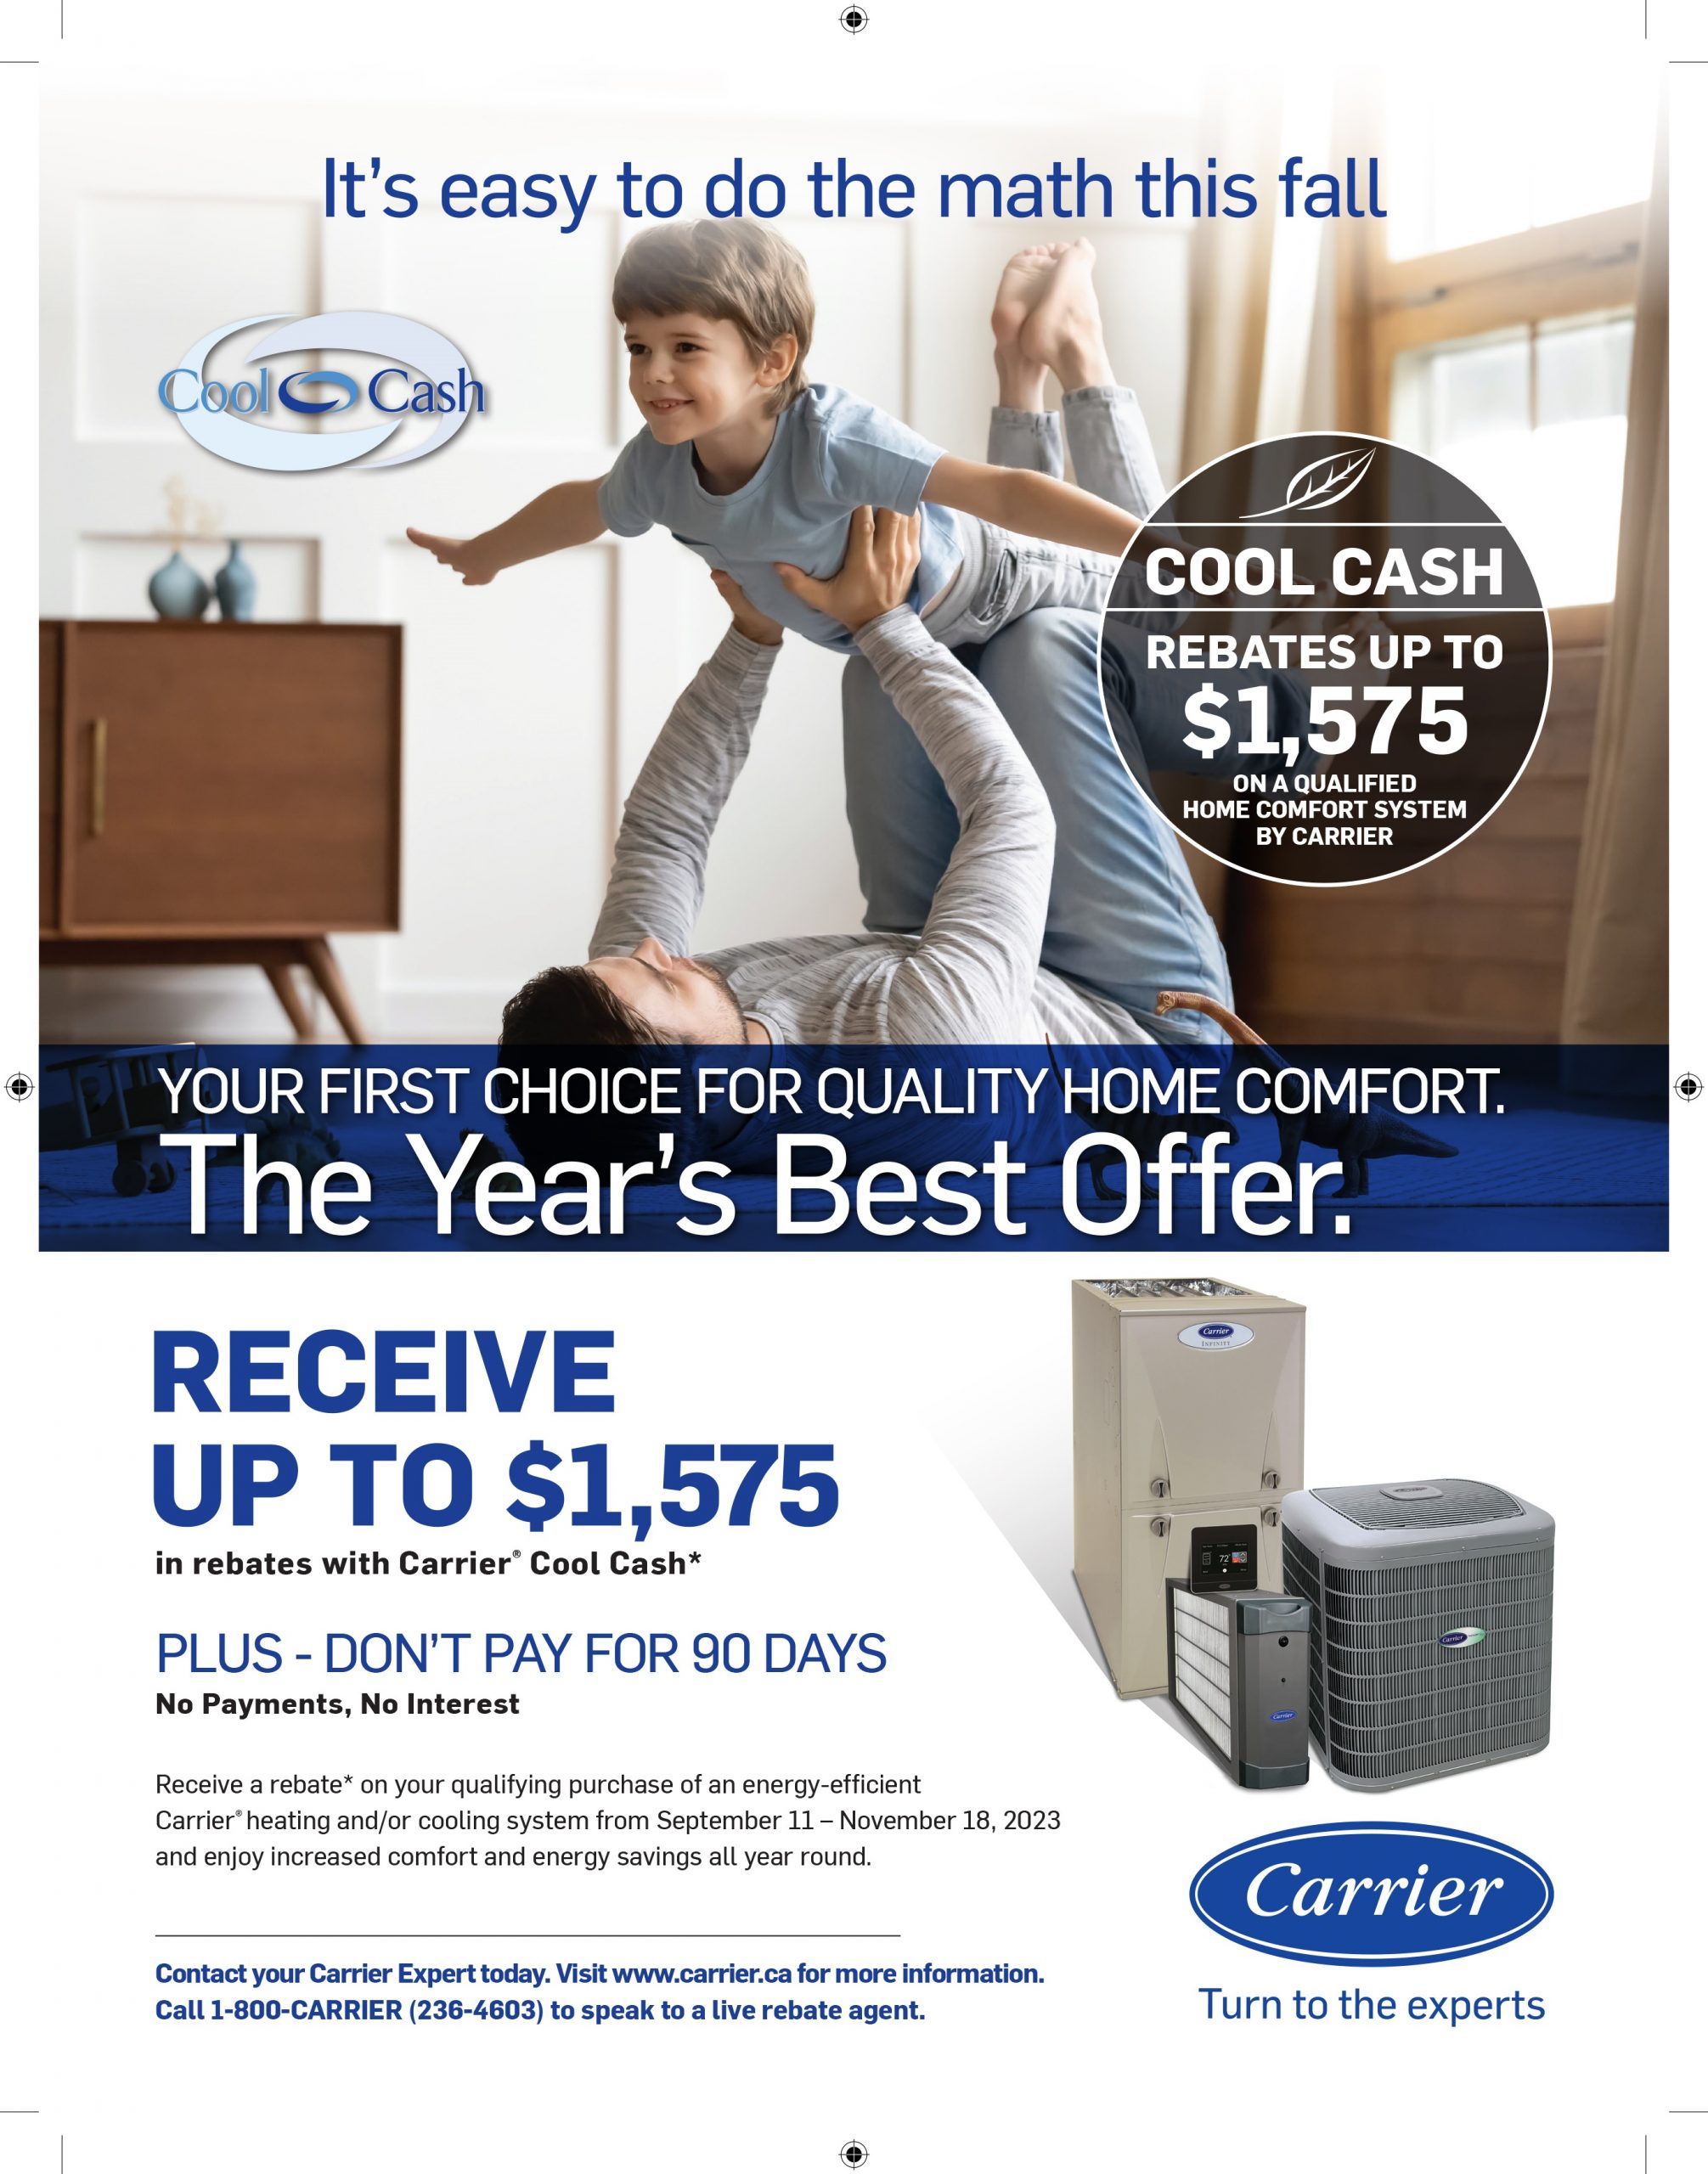 get-carrier-2021-spring-rebate-and-promotion-in-toronto-the-gta